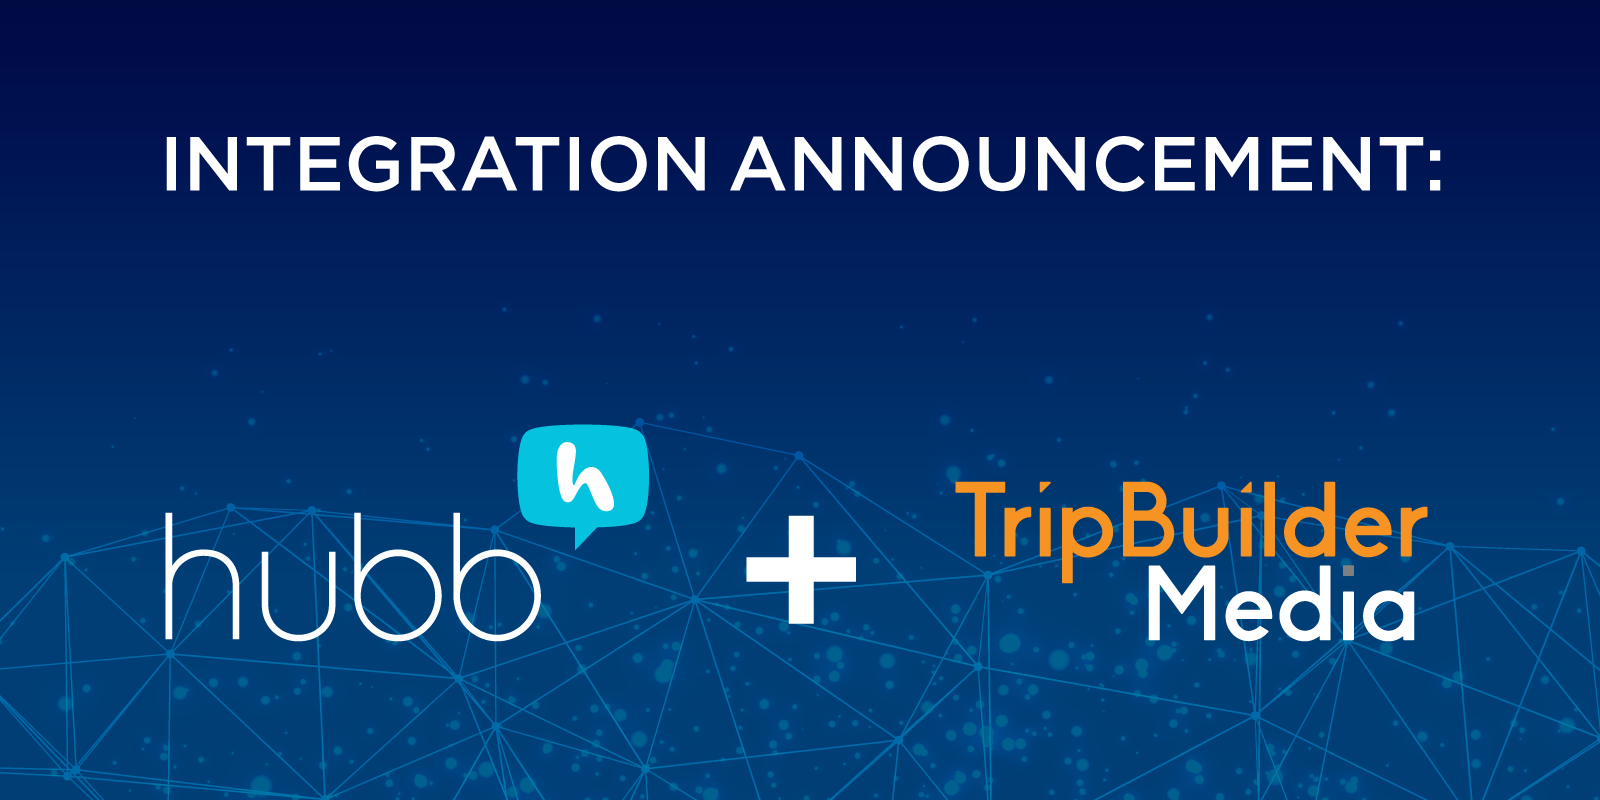 Announcing the Hubb and TripBuilder Media Integration